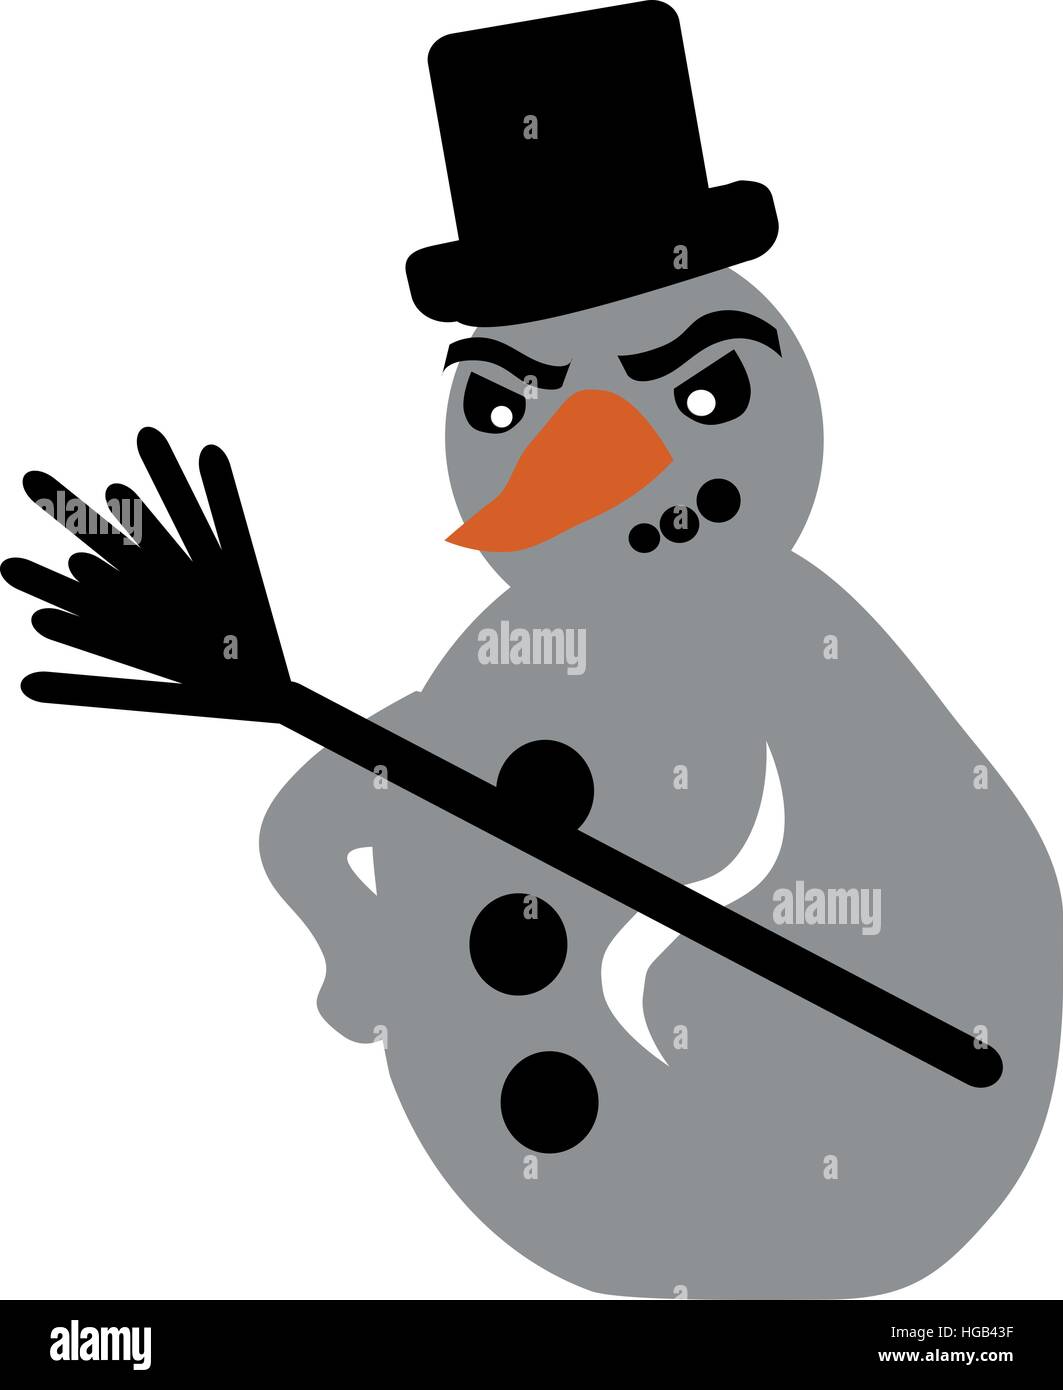 Bad angry snowman with broom Stock Vector